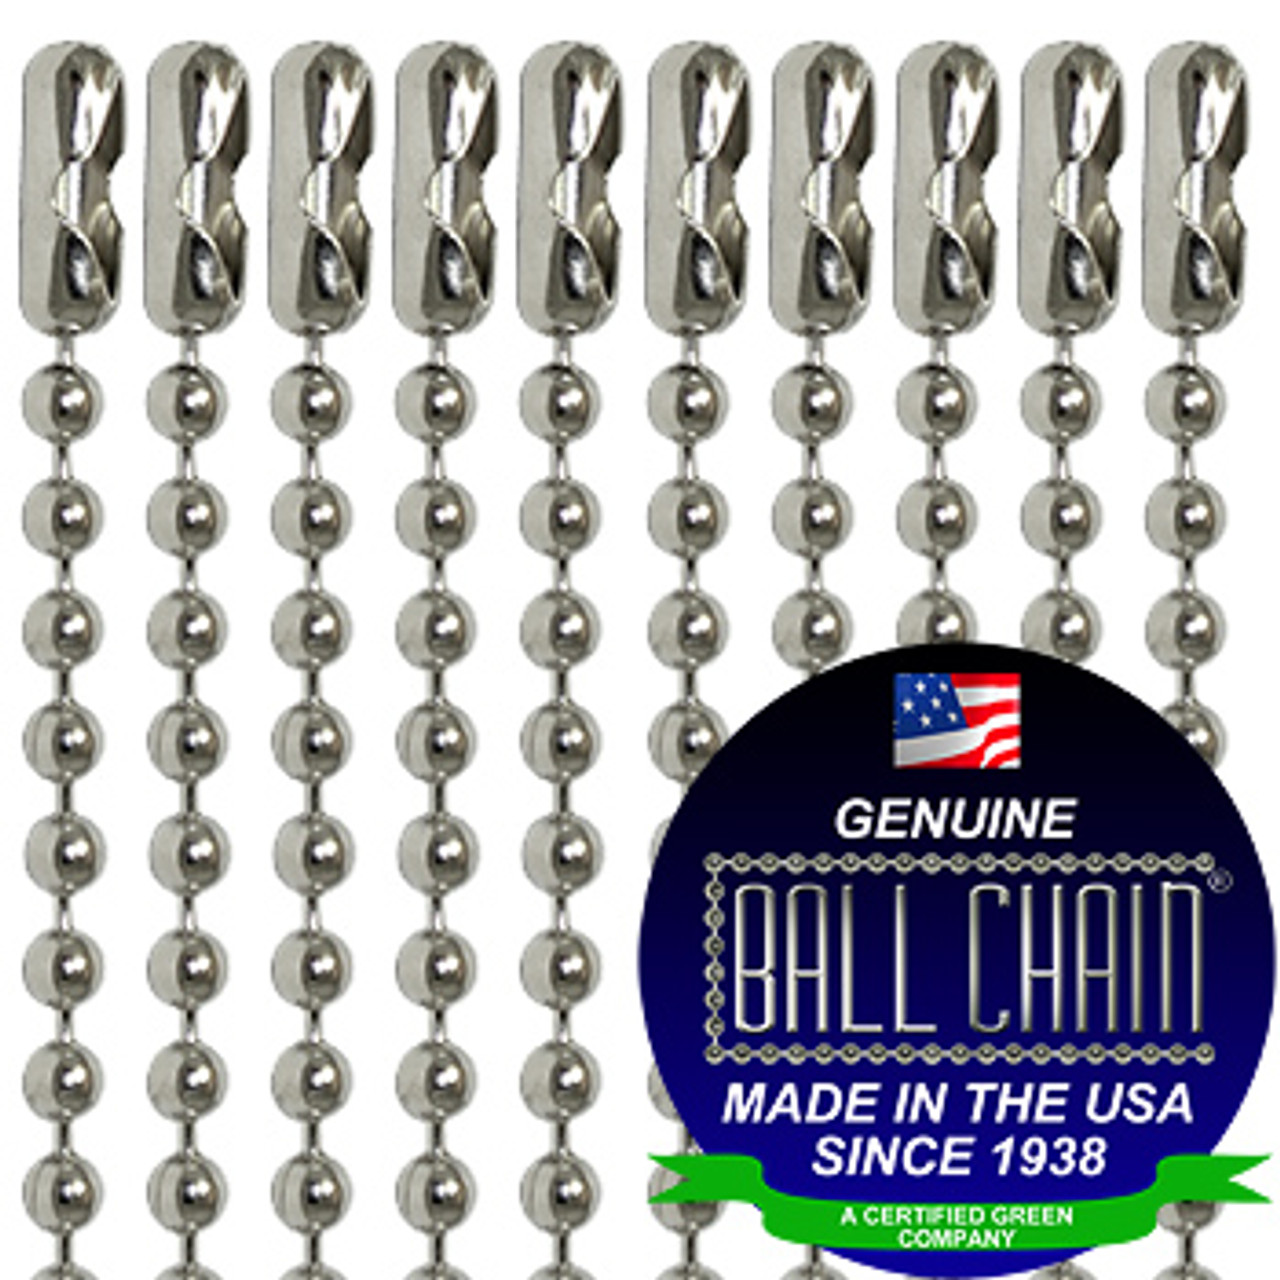 #3 Nickel Plated Steel Ball Chains with Connector - 24 Inch Length. 24 inch nickel plated steel ball chain necklaces.